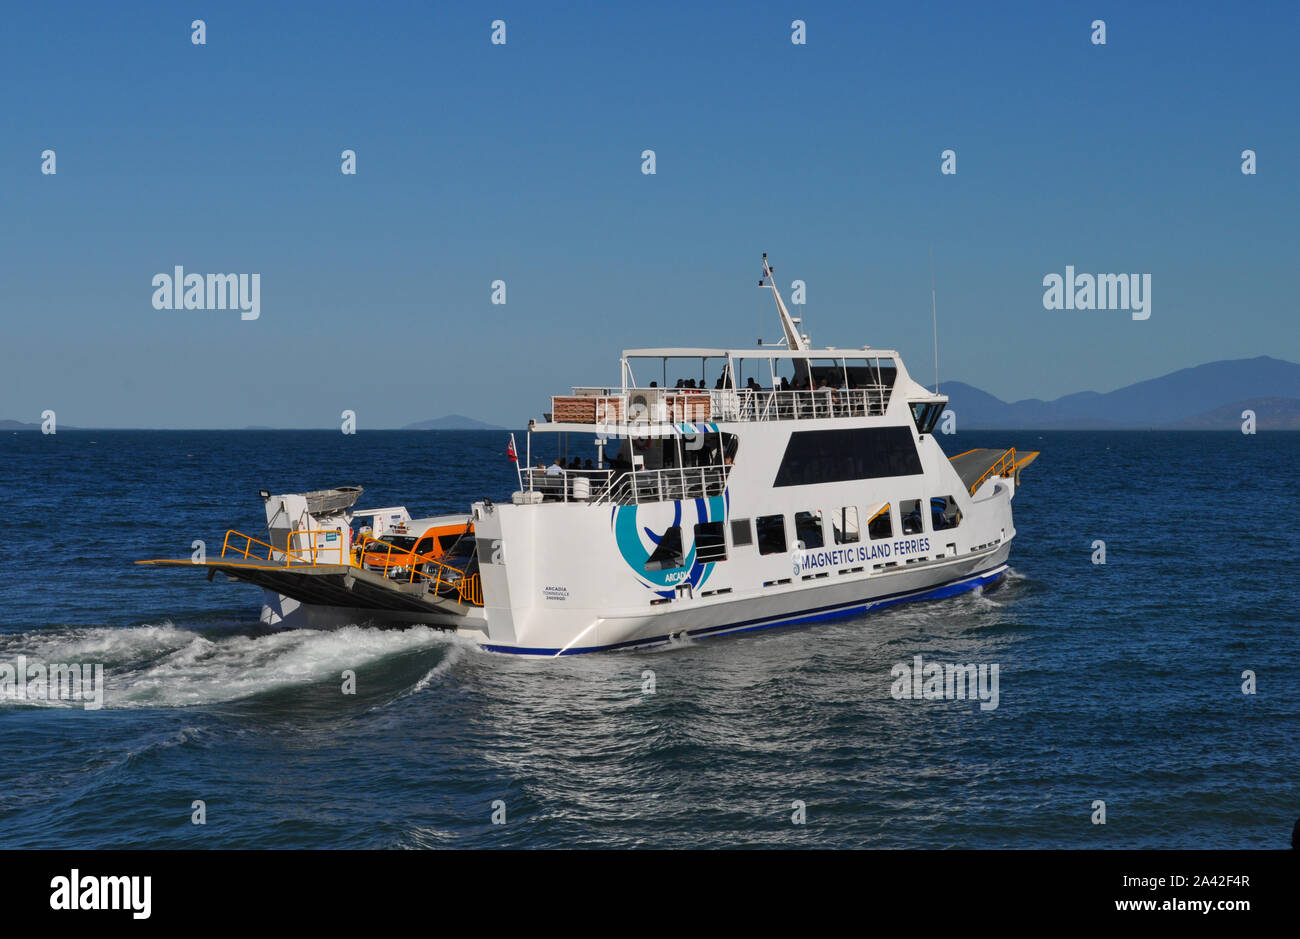 Townsville Magnetic Island Vehicle Ferry High Resolution Stock Photography  and Images - Alamy